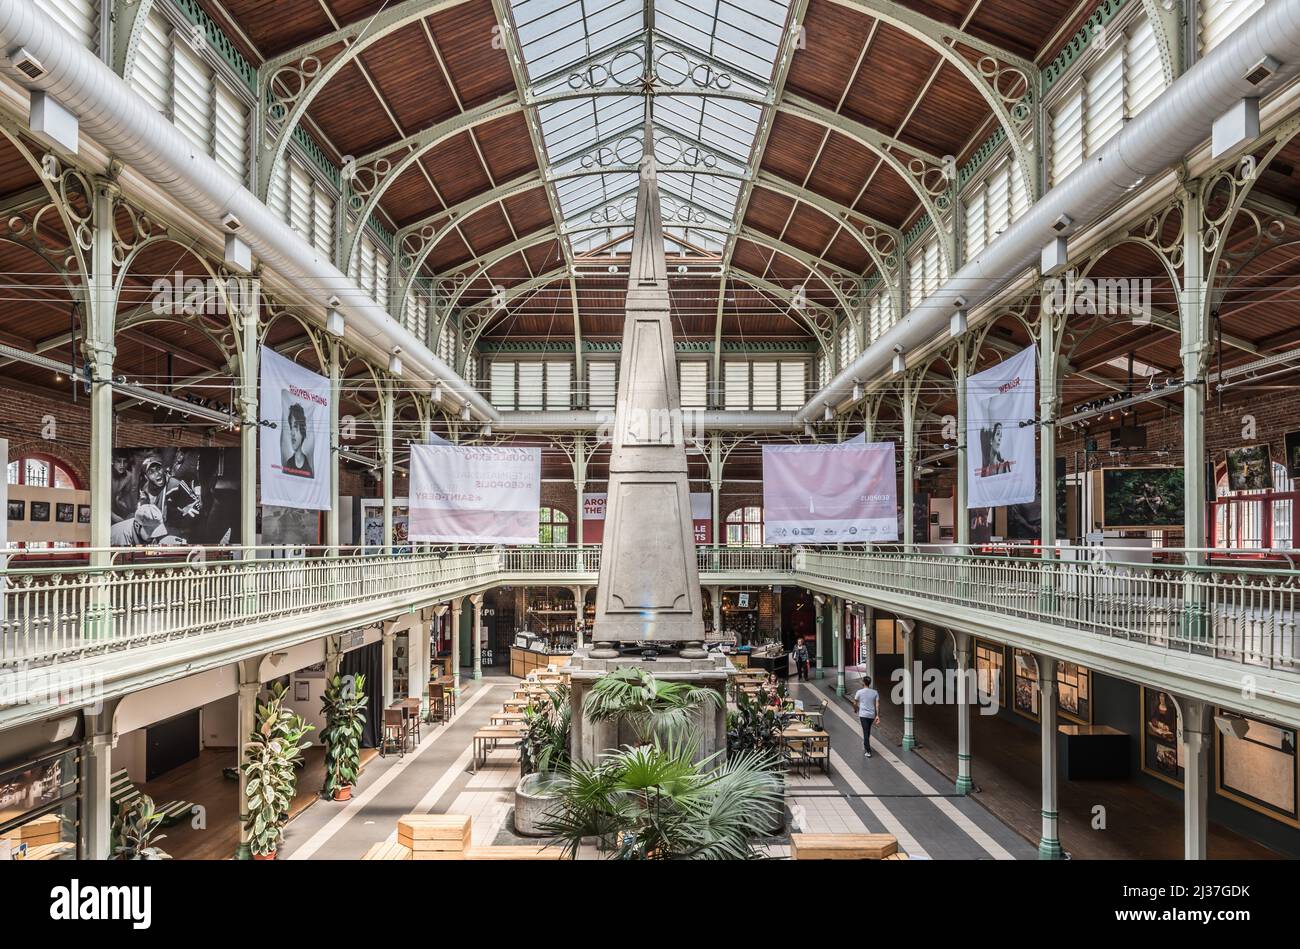 Brussels Old Town - Belgium Interior design of the Halles Saint-Gery - Sint Goriks Hallen a commercial mall with restaurants, expositions and cafés. Stock Photo